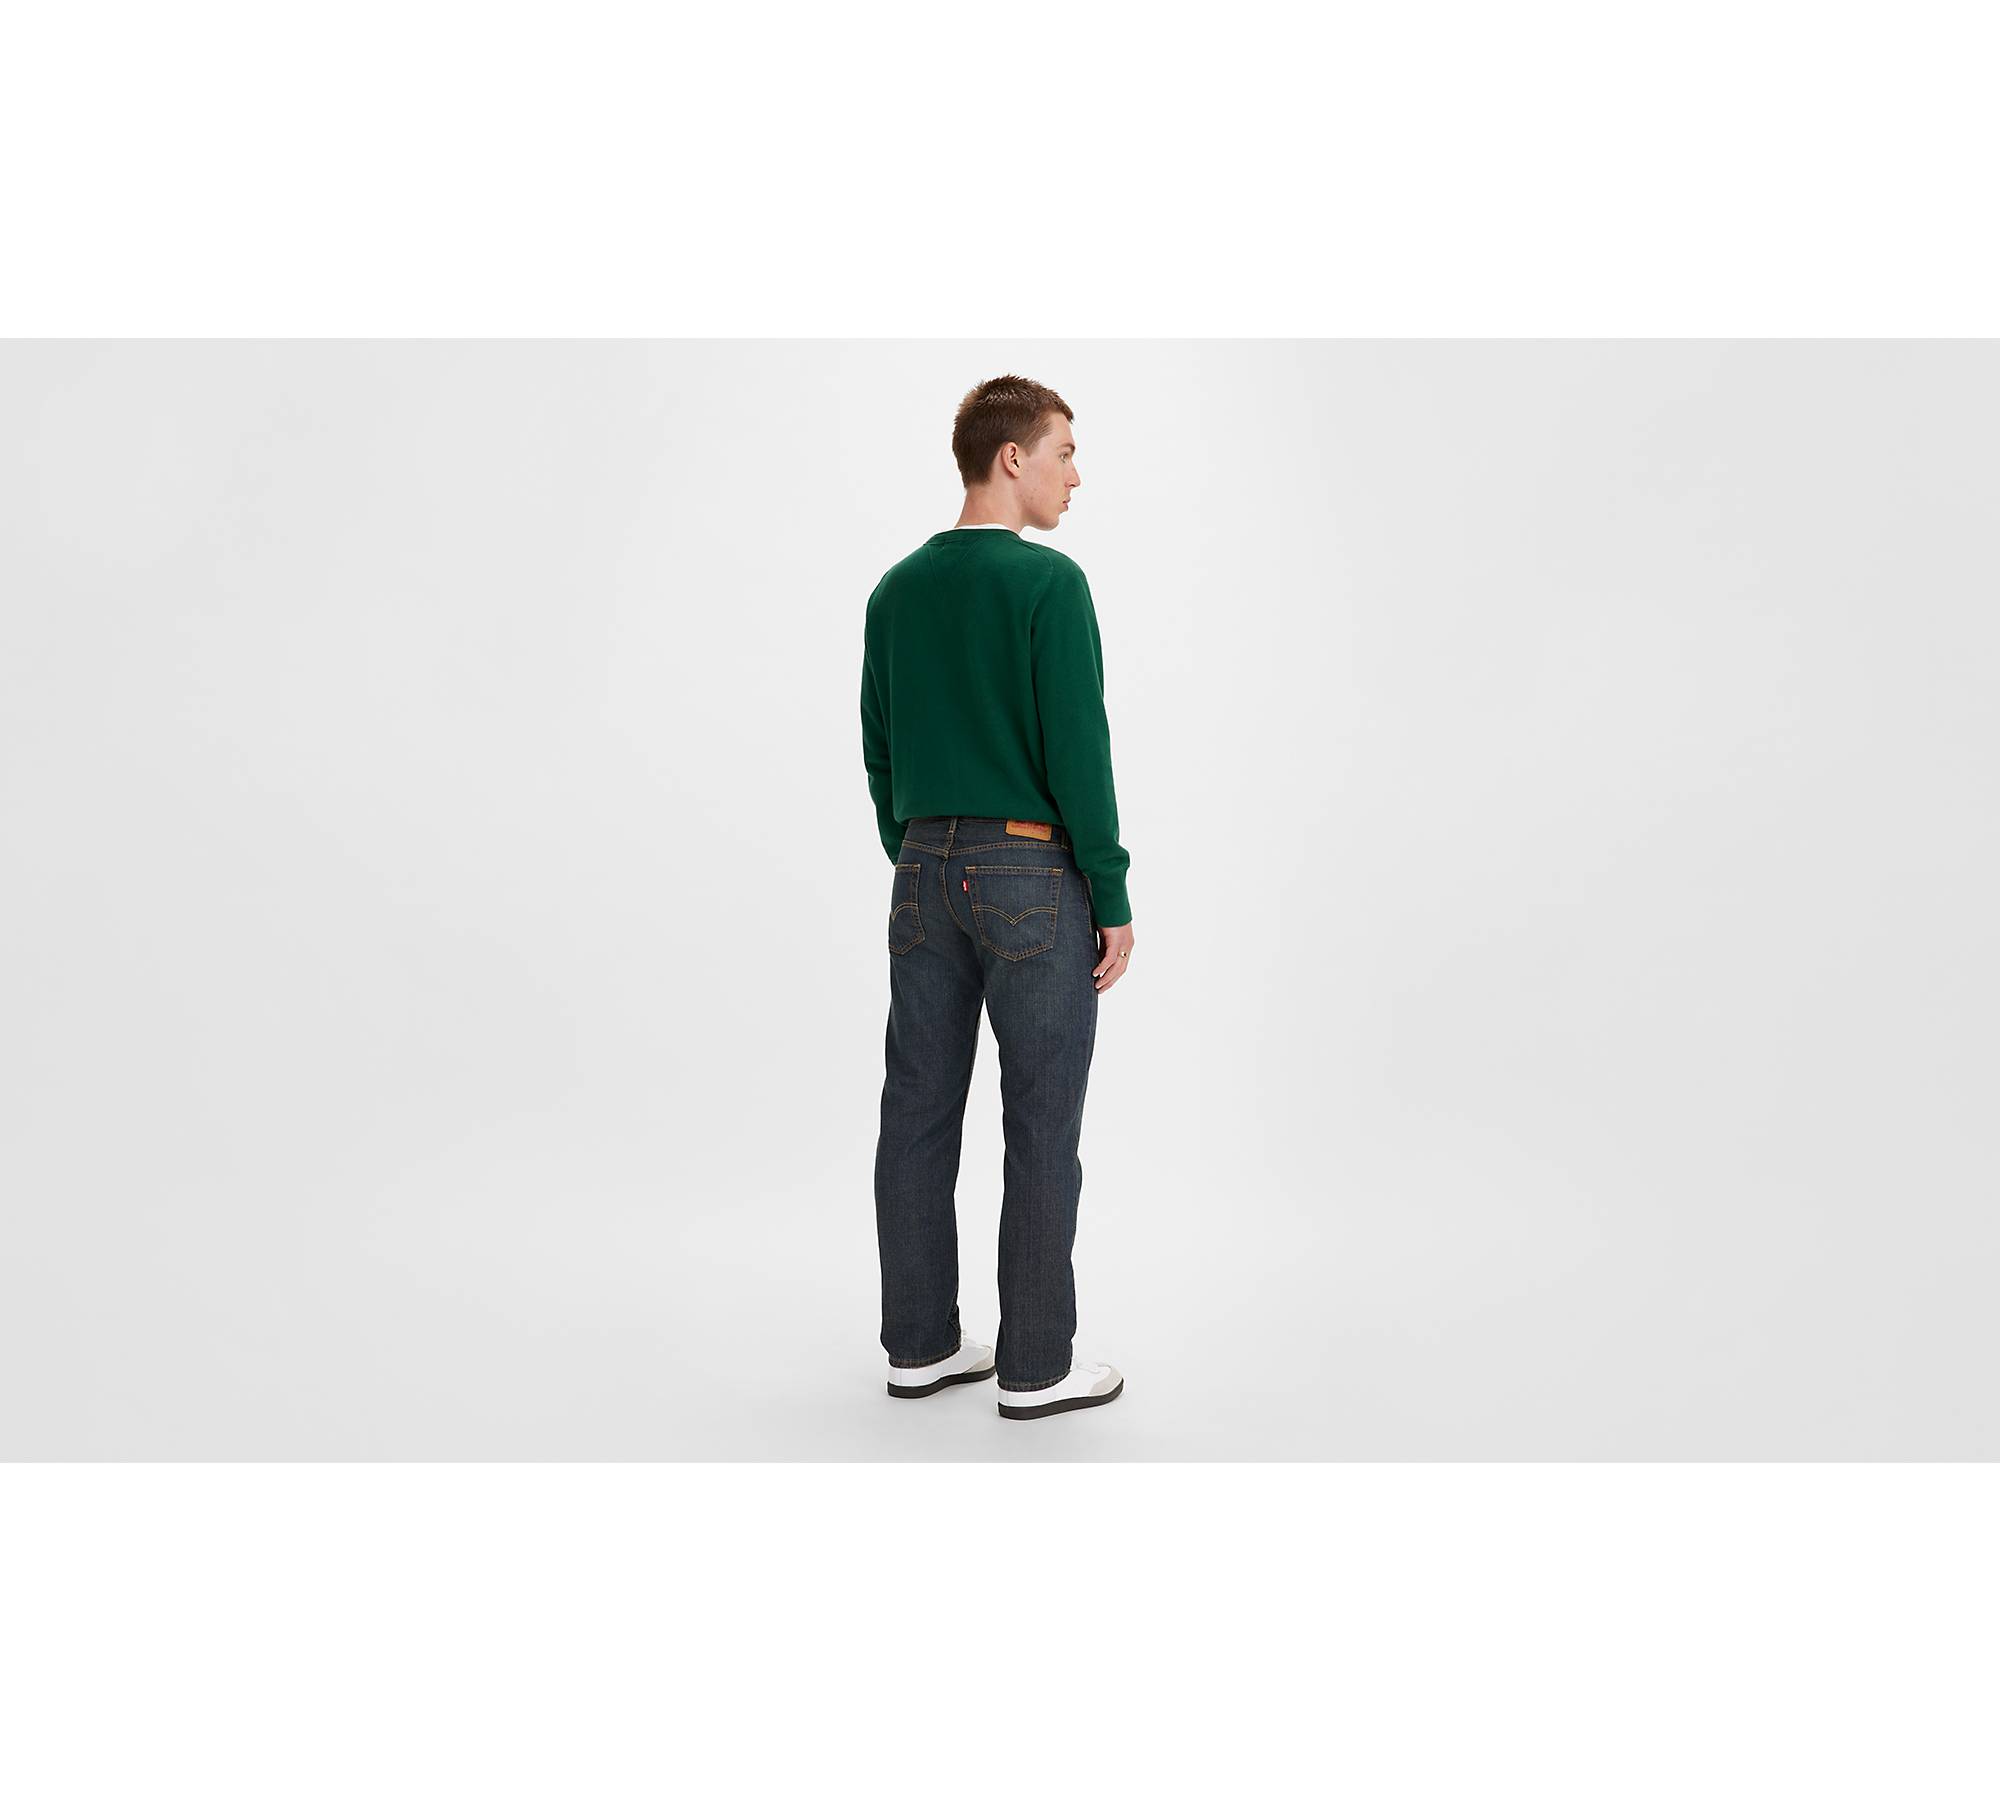 559™ Relaxed Straight Fit Men's Jeans - Dark Wash | Levi's®